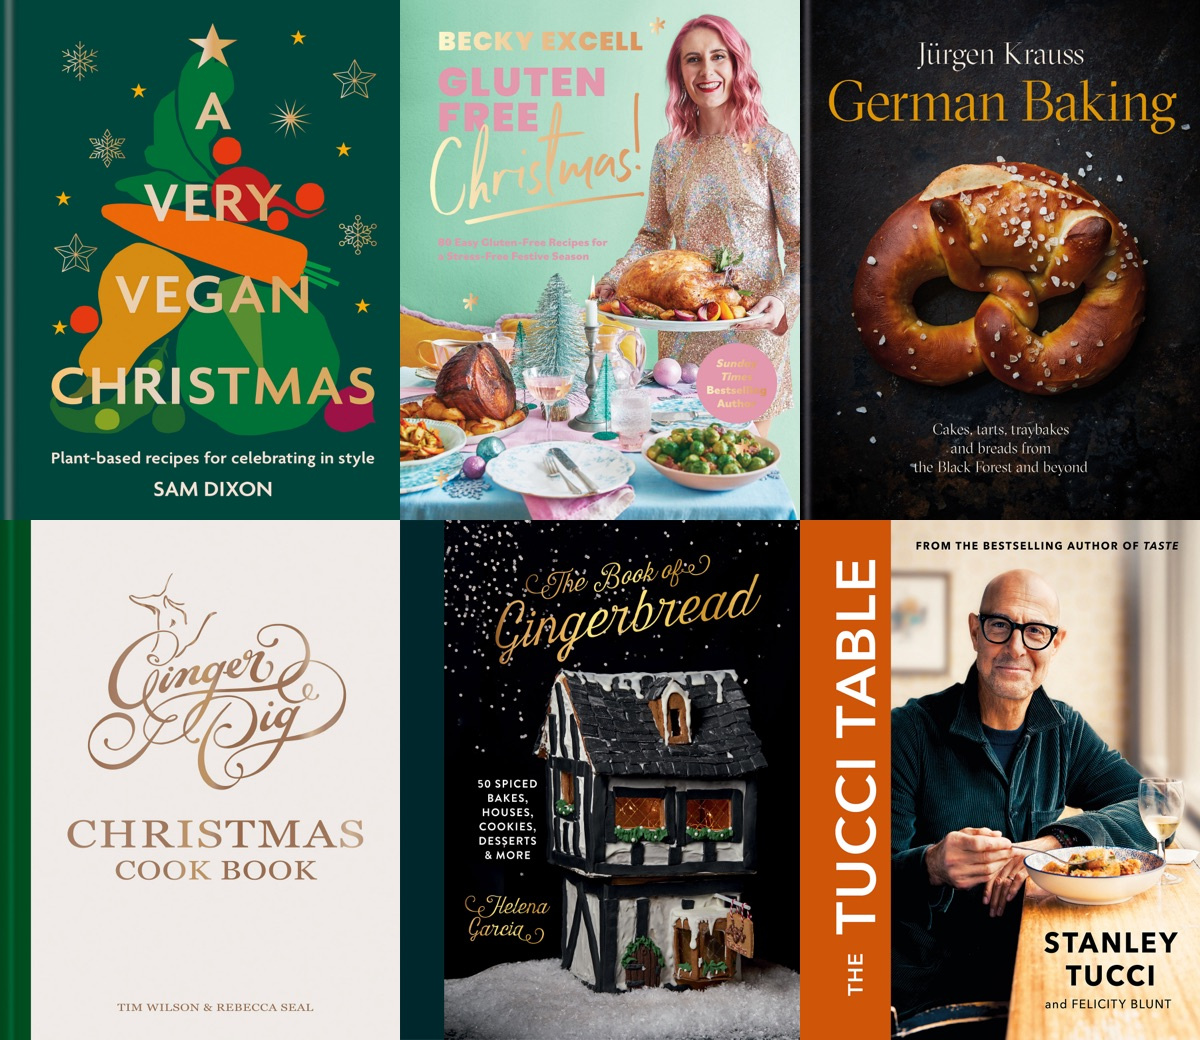 Image of the Christmas Cookbook Corner Covers